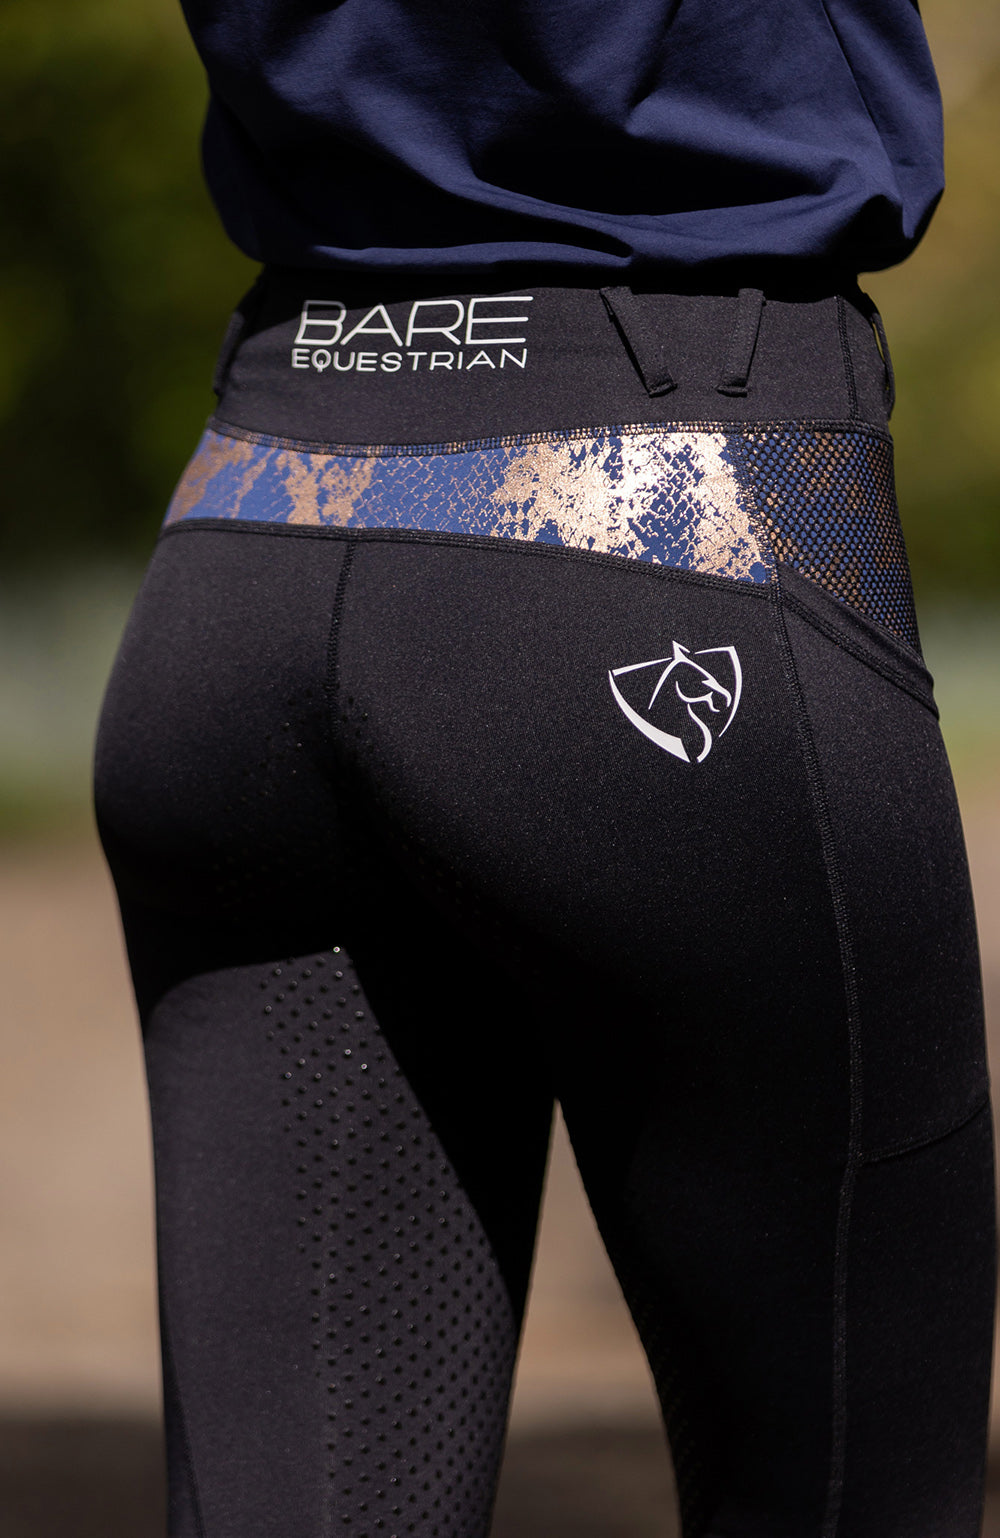 BARE Performance Riding Tights - Black Navy & Rose Gold